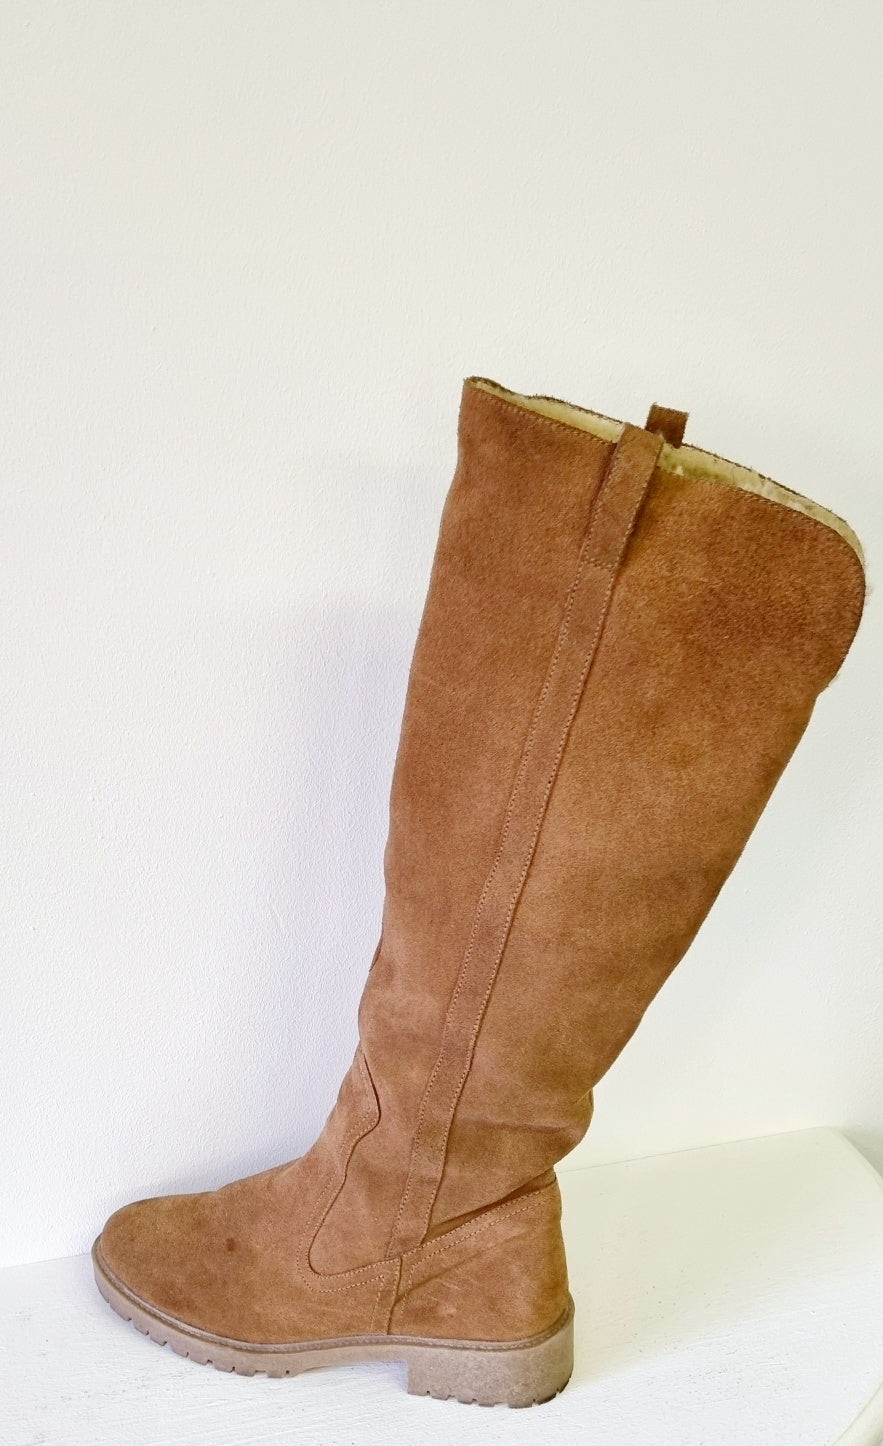 Zara Trafaluc - Brown knee high suede boots with faux fur lining